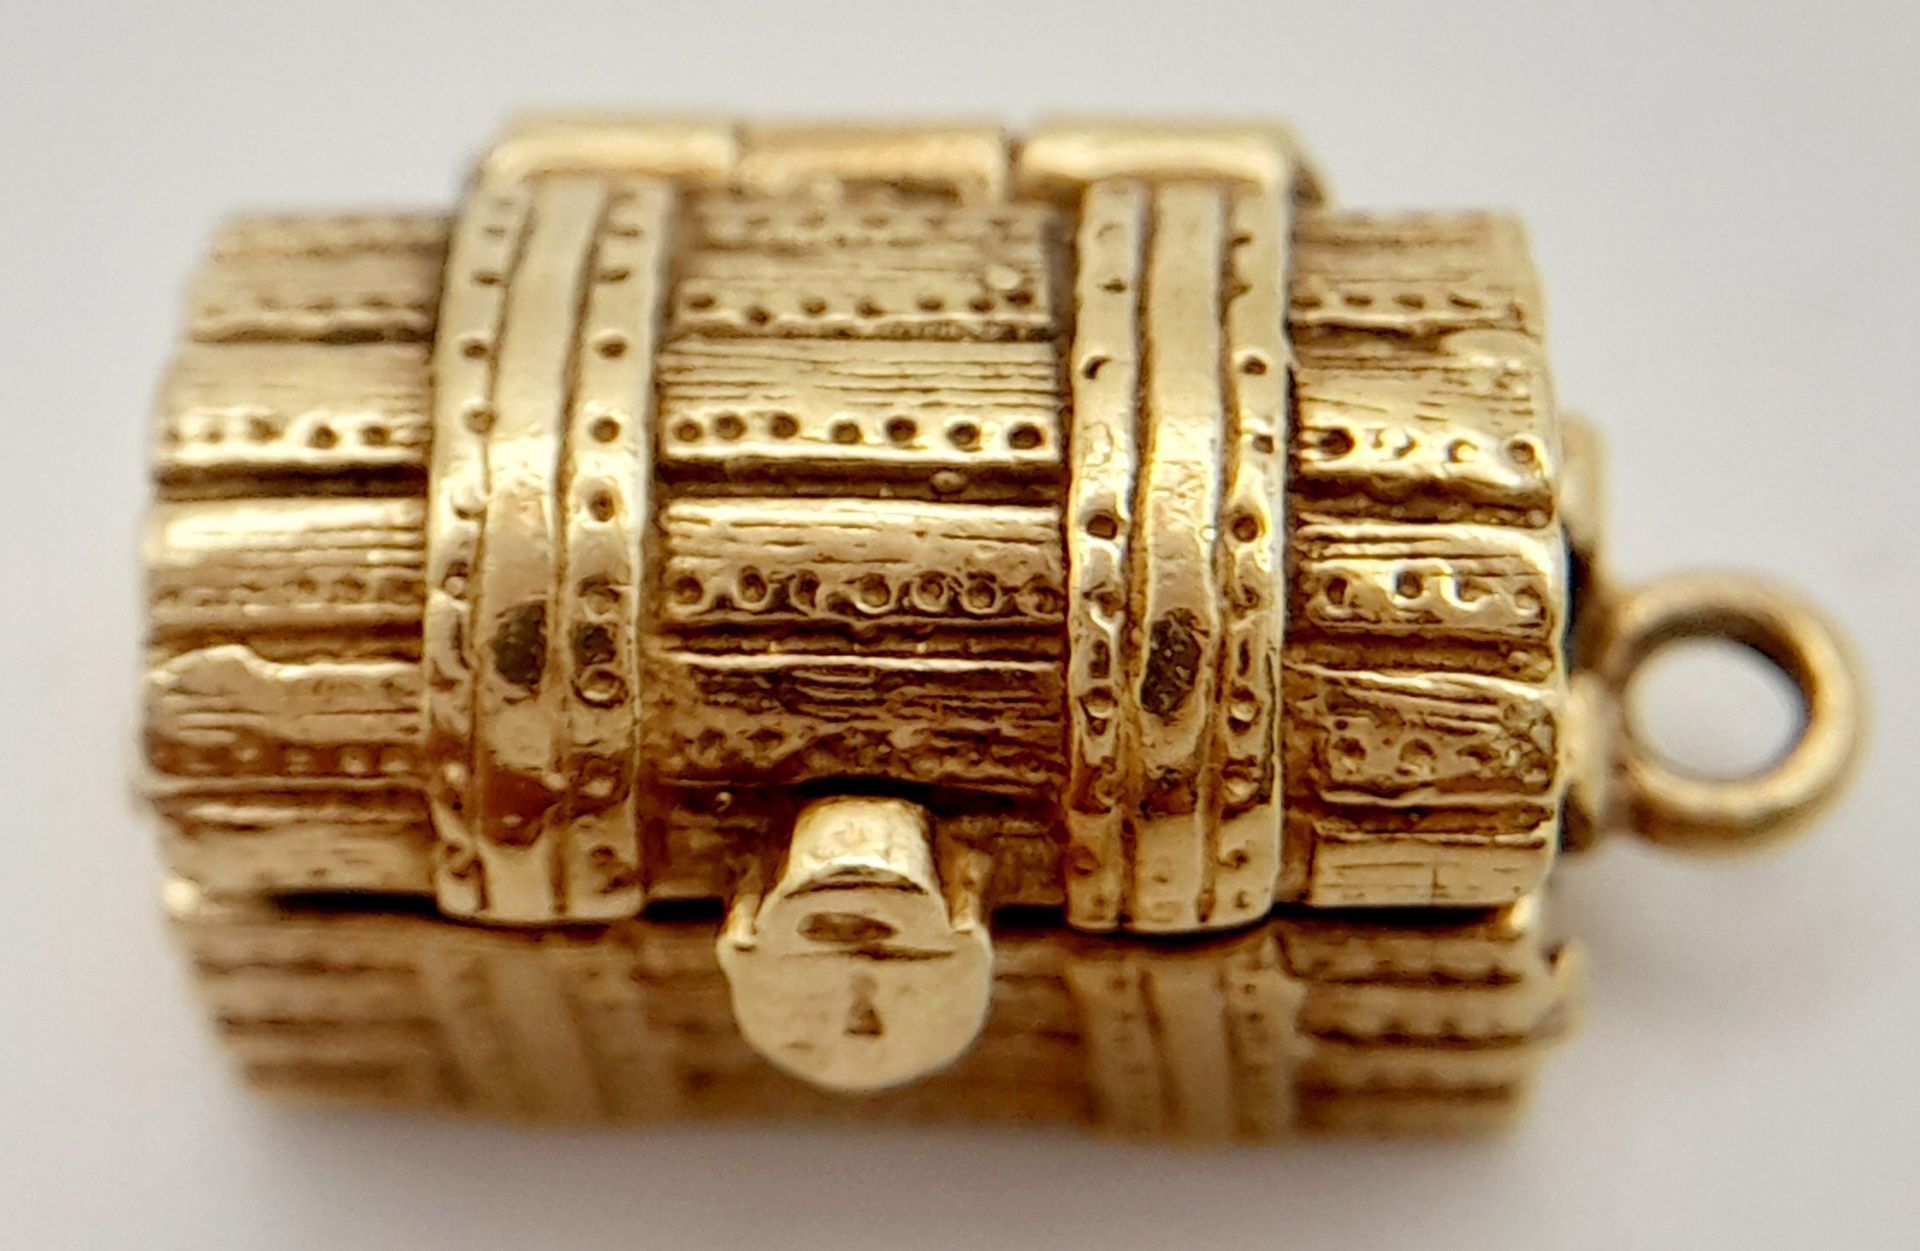 A 9K YELLOW GOLD TREASURE CHEST CHARM, WHICH OPENS TO REVEAL THE TREASURE INSIDE. 2cm length, 6.5g - Image 2 of 5